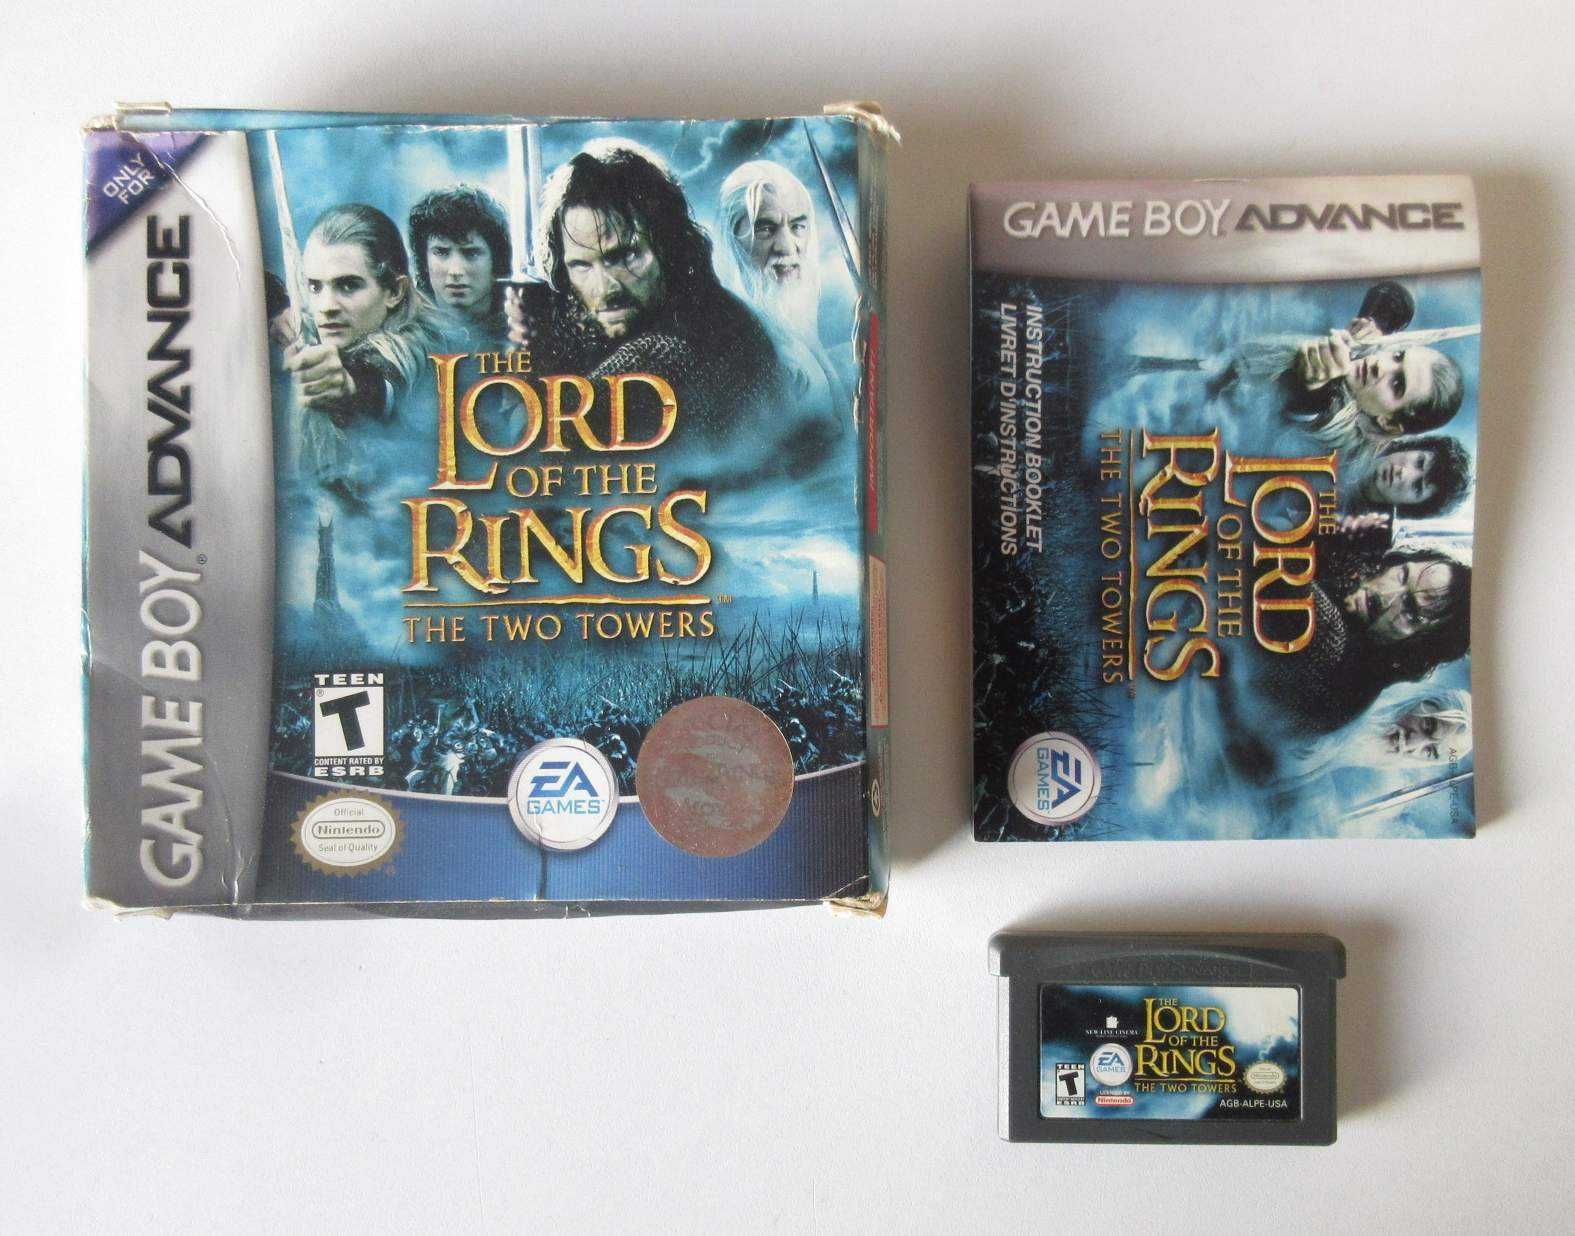 GAME BOY ADVANCE - The Lord Of The Rings